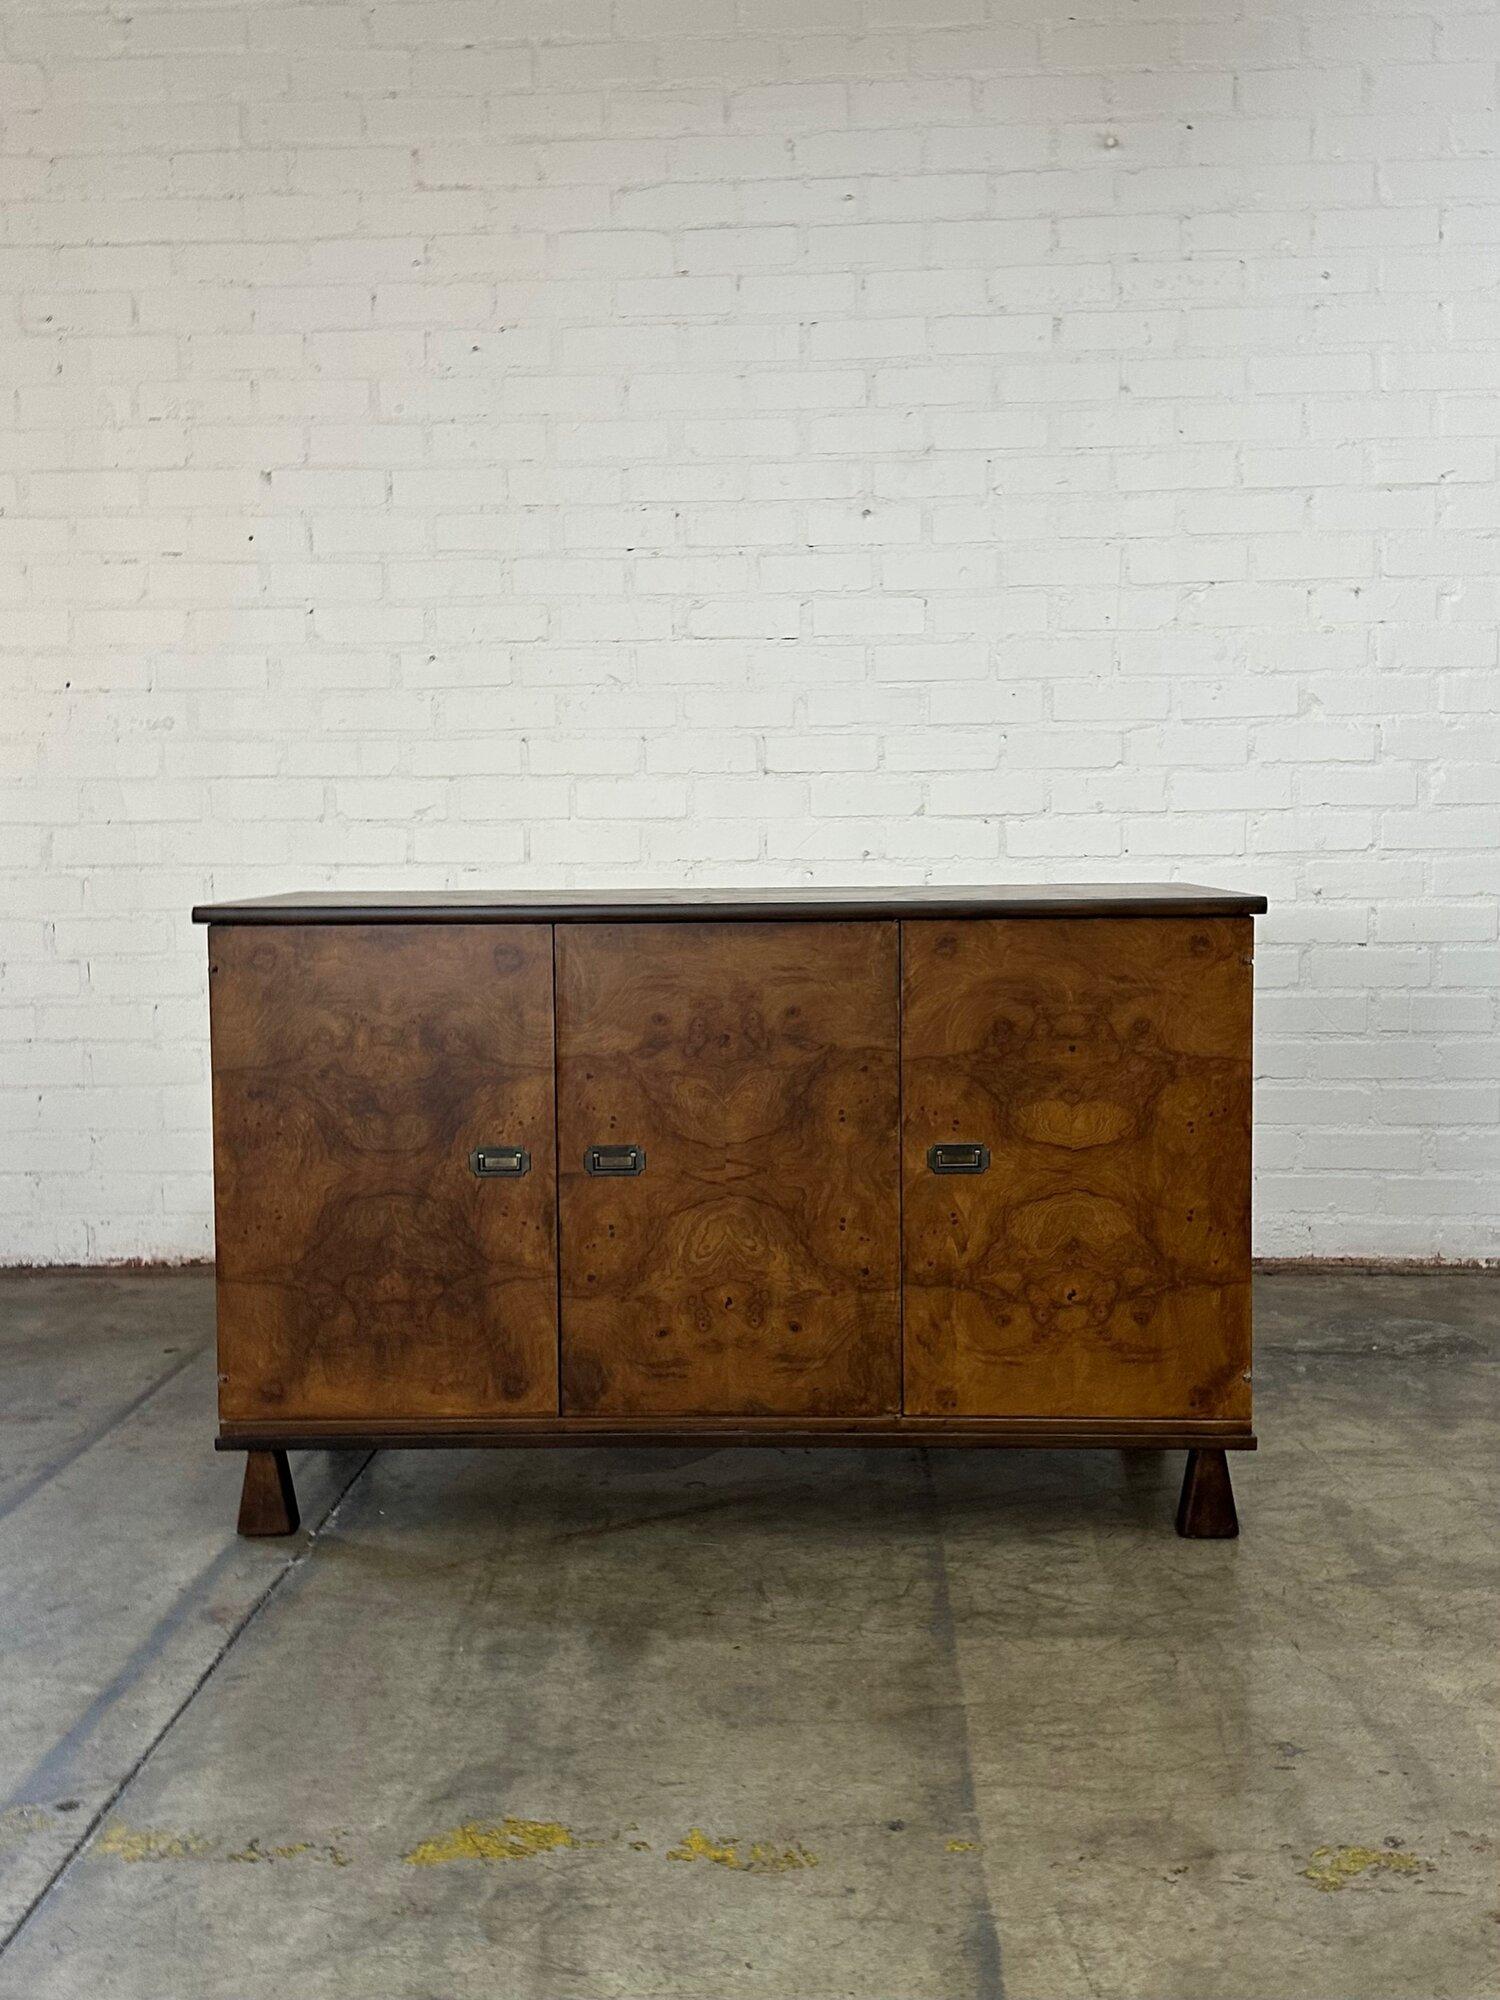 W56 D19 H33

Burlwood and Walnut stained Oak credenza. Fully refinished and structurally sound. Item features trapezoid legs and brass hardware.

Circa 1970’s